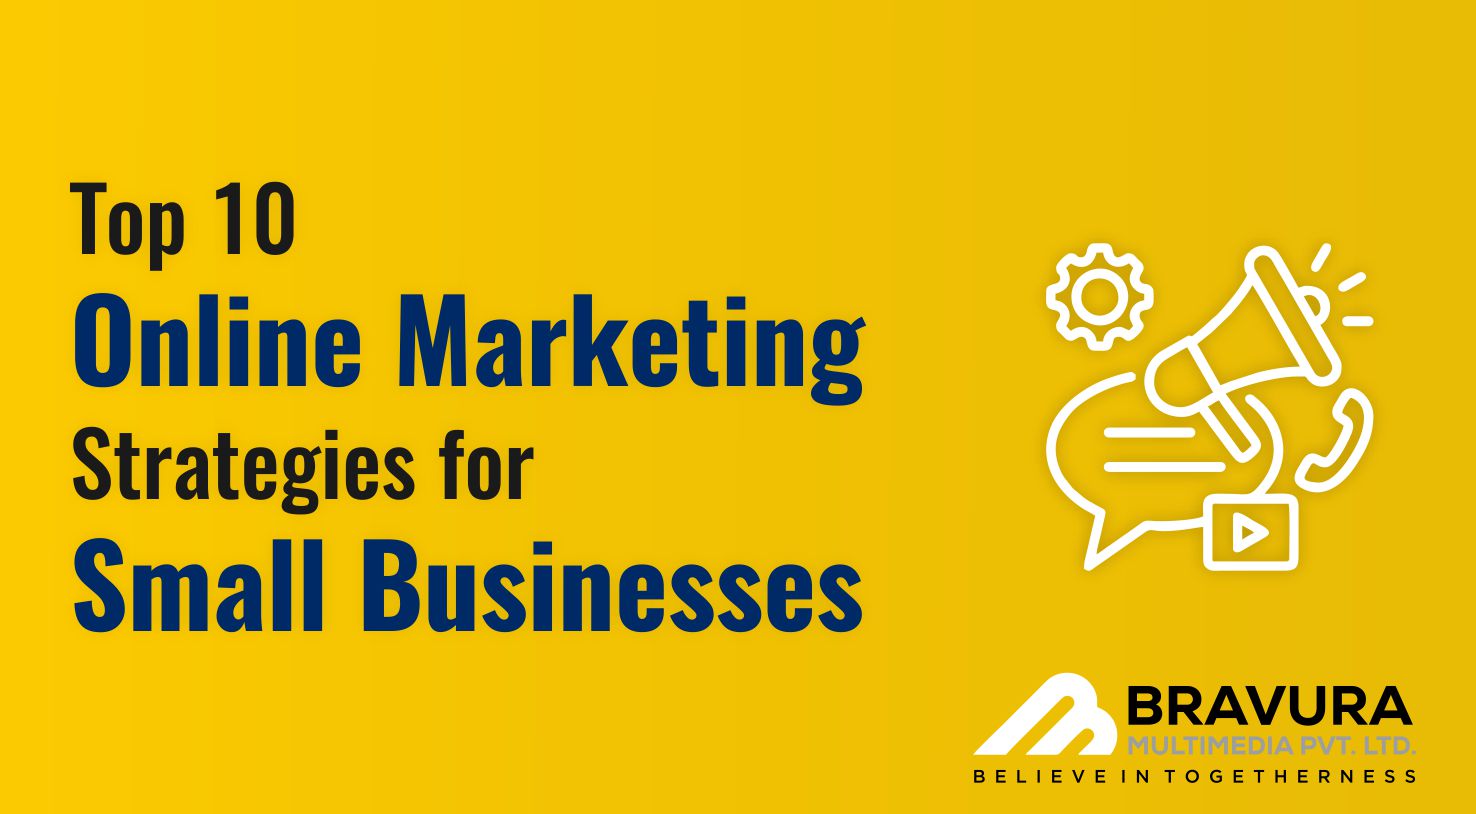 Top 10 Online Marketing Strategies for Small Businesses